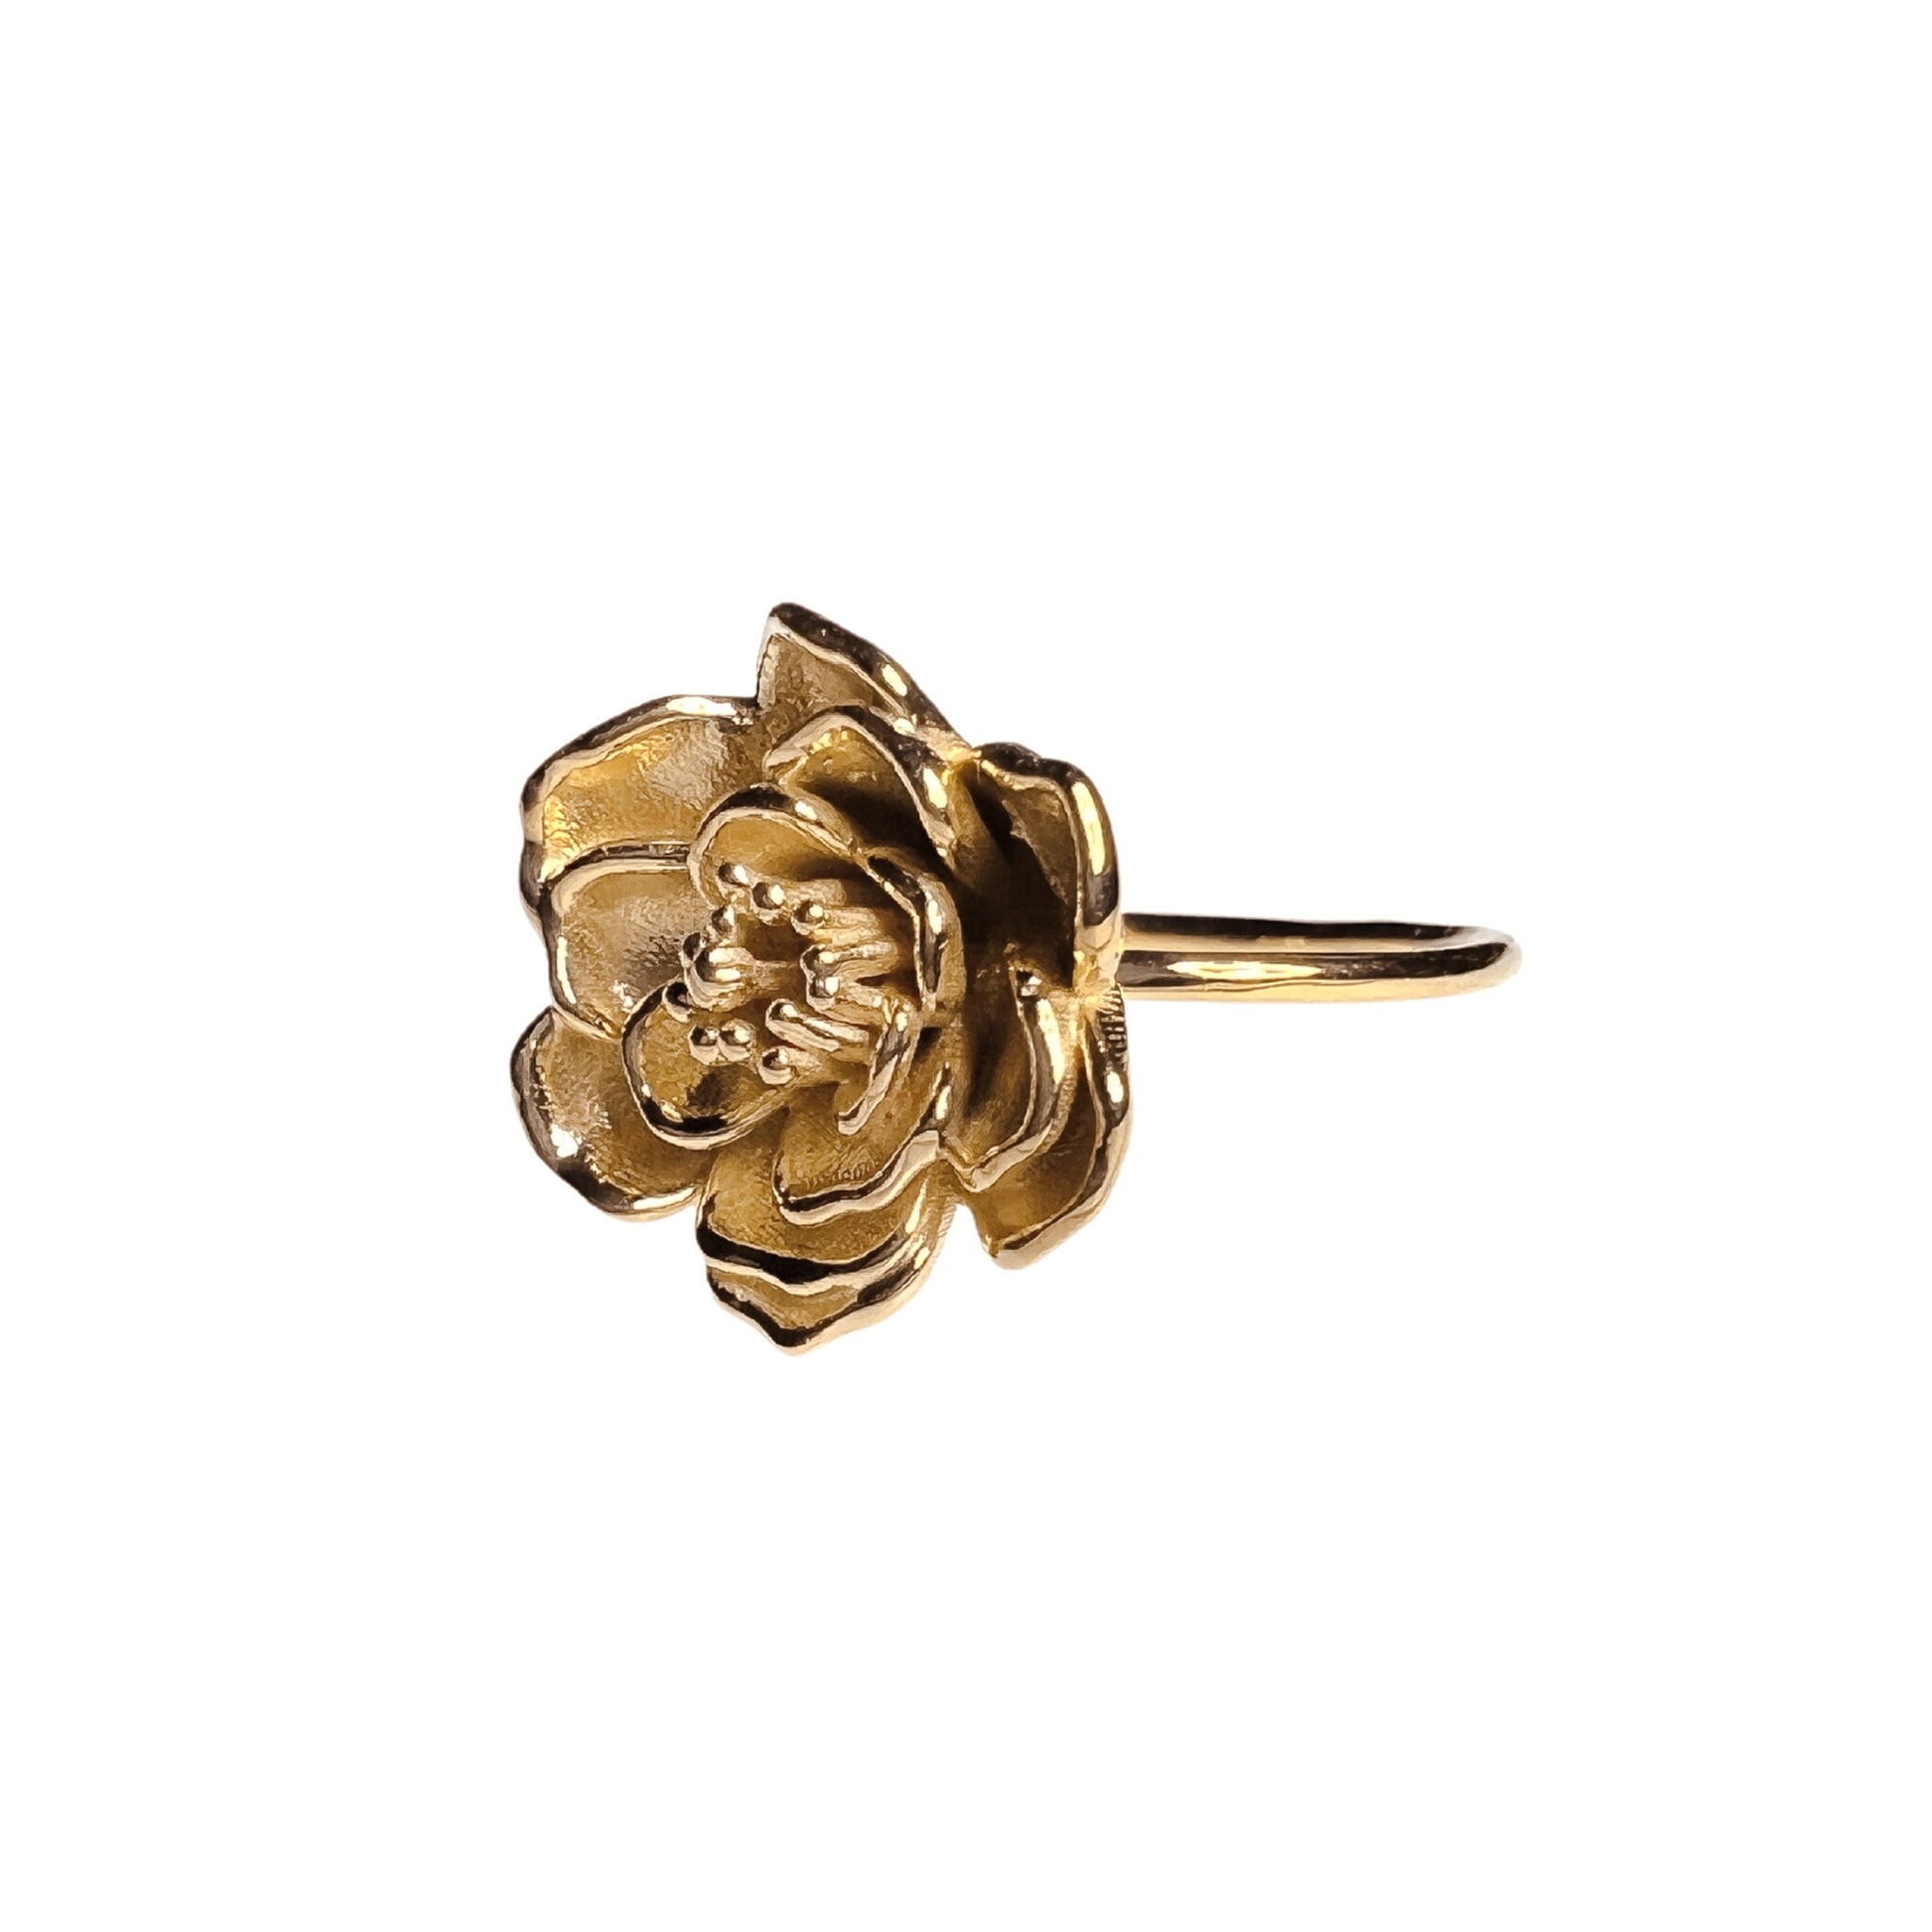 Cactus Bloom Ring in Solid Silver, Vermeil, or 14K Gold Plate